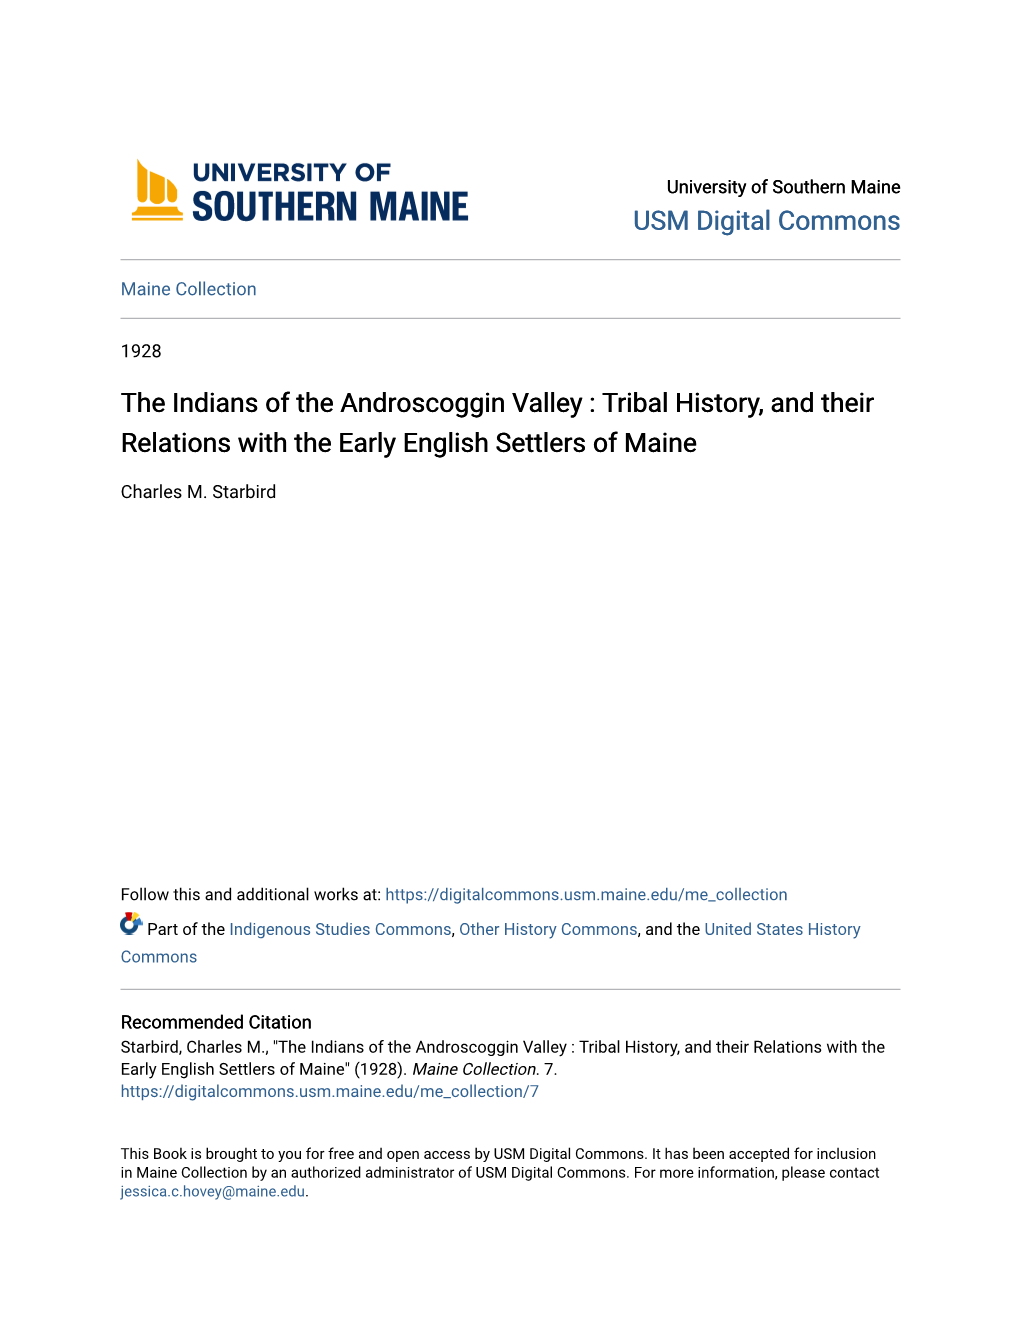 The Indians of the Androscoggin Valley : Tribal History, and Their Relations with the Early English Settlers of Maine